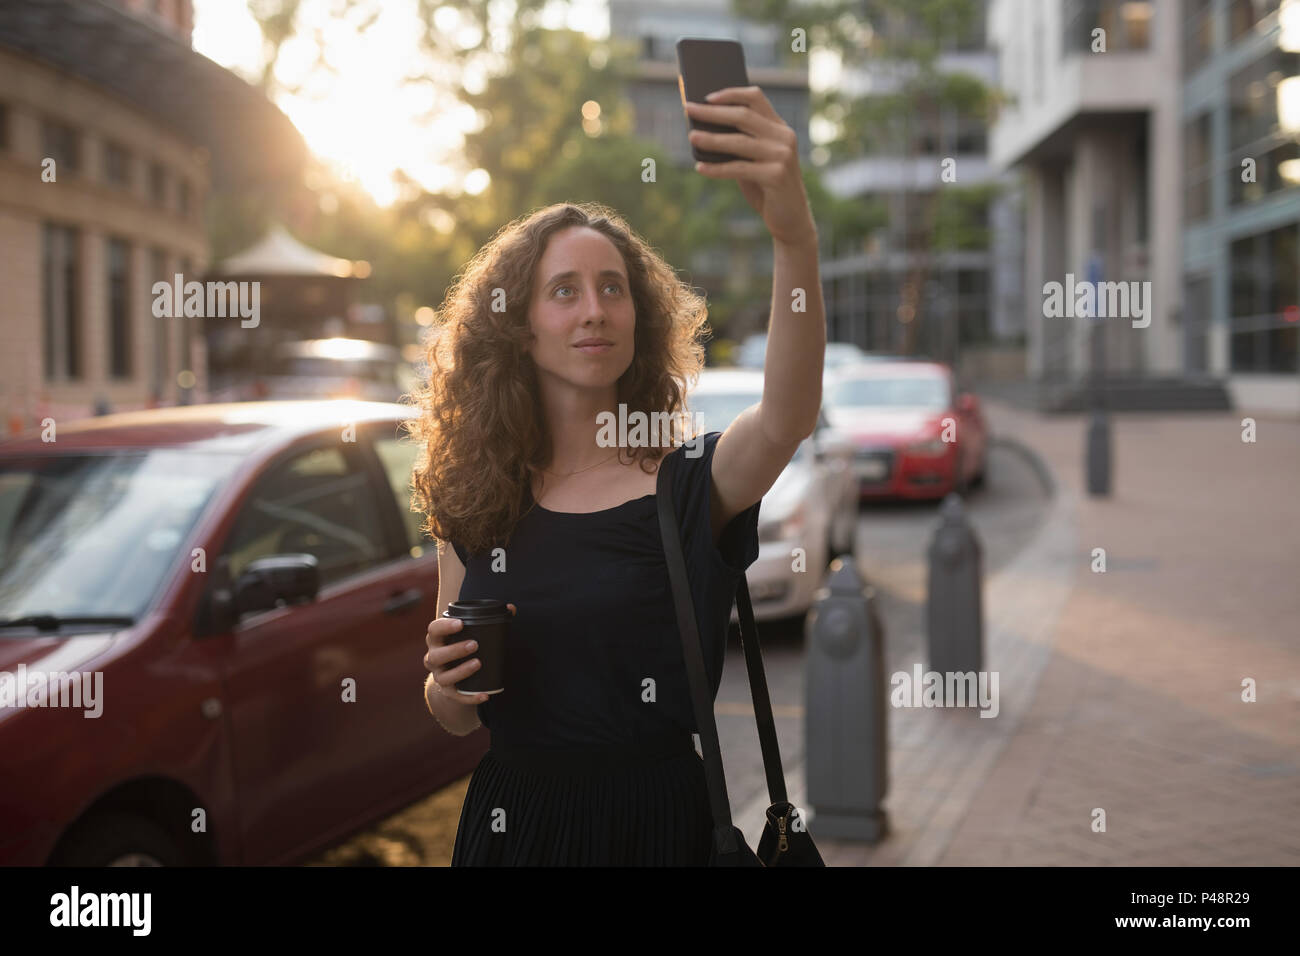 Woman with mobile phone selfies Banque D'Images